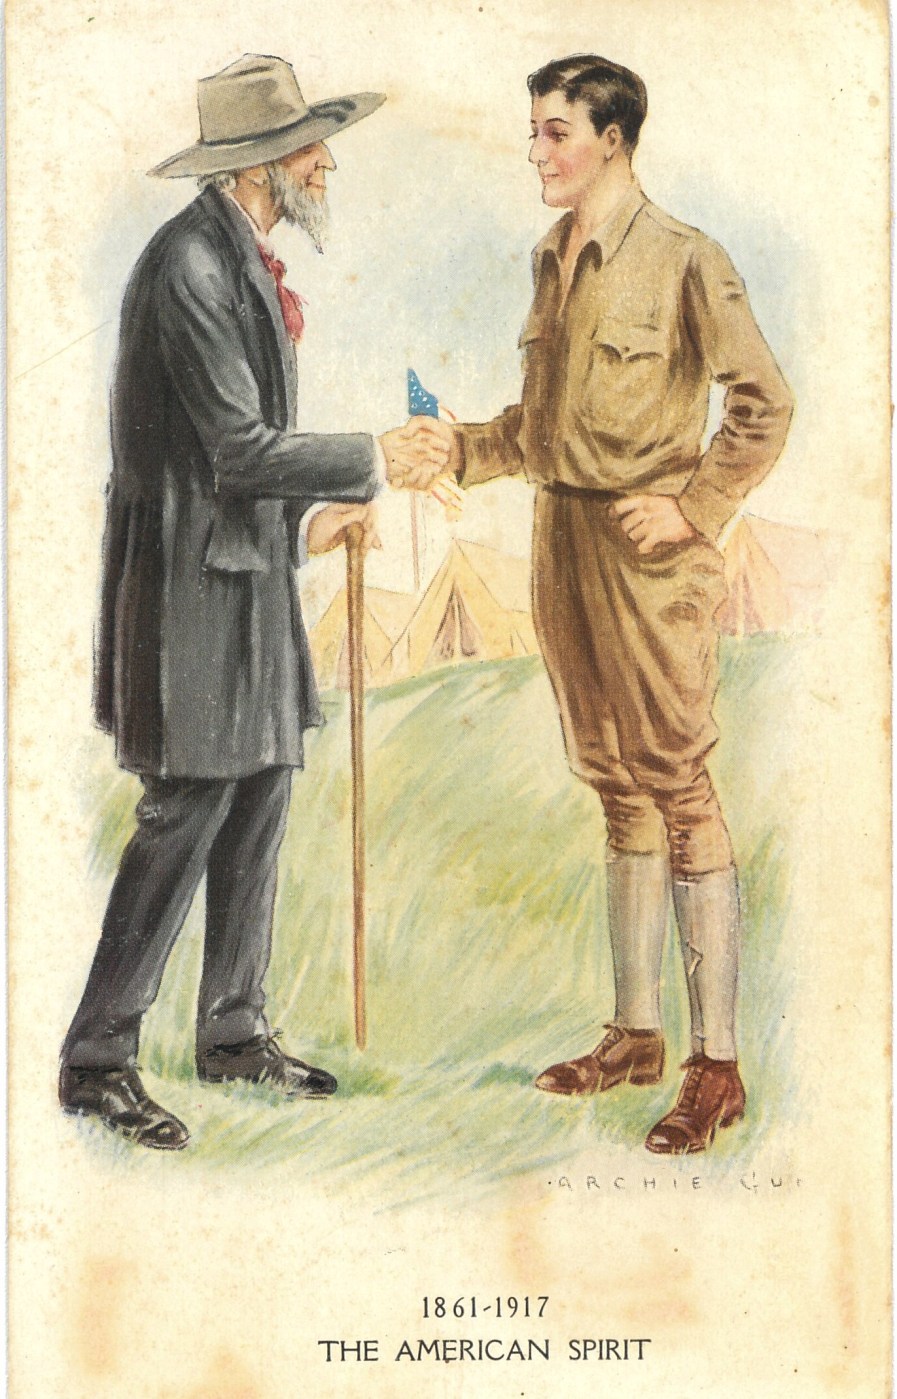 “1861 – 1917 The American Spirit,” signed by Archie Gunn. Illustrated Postal Card & Novelty Co., NY, unused, ca. 1917. Aged Civil War veteran and young WWI soldier shake hands. (NCA)